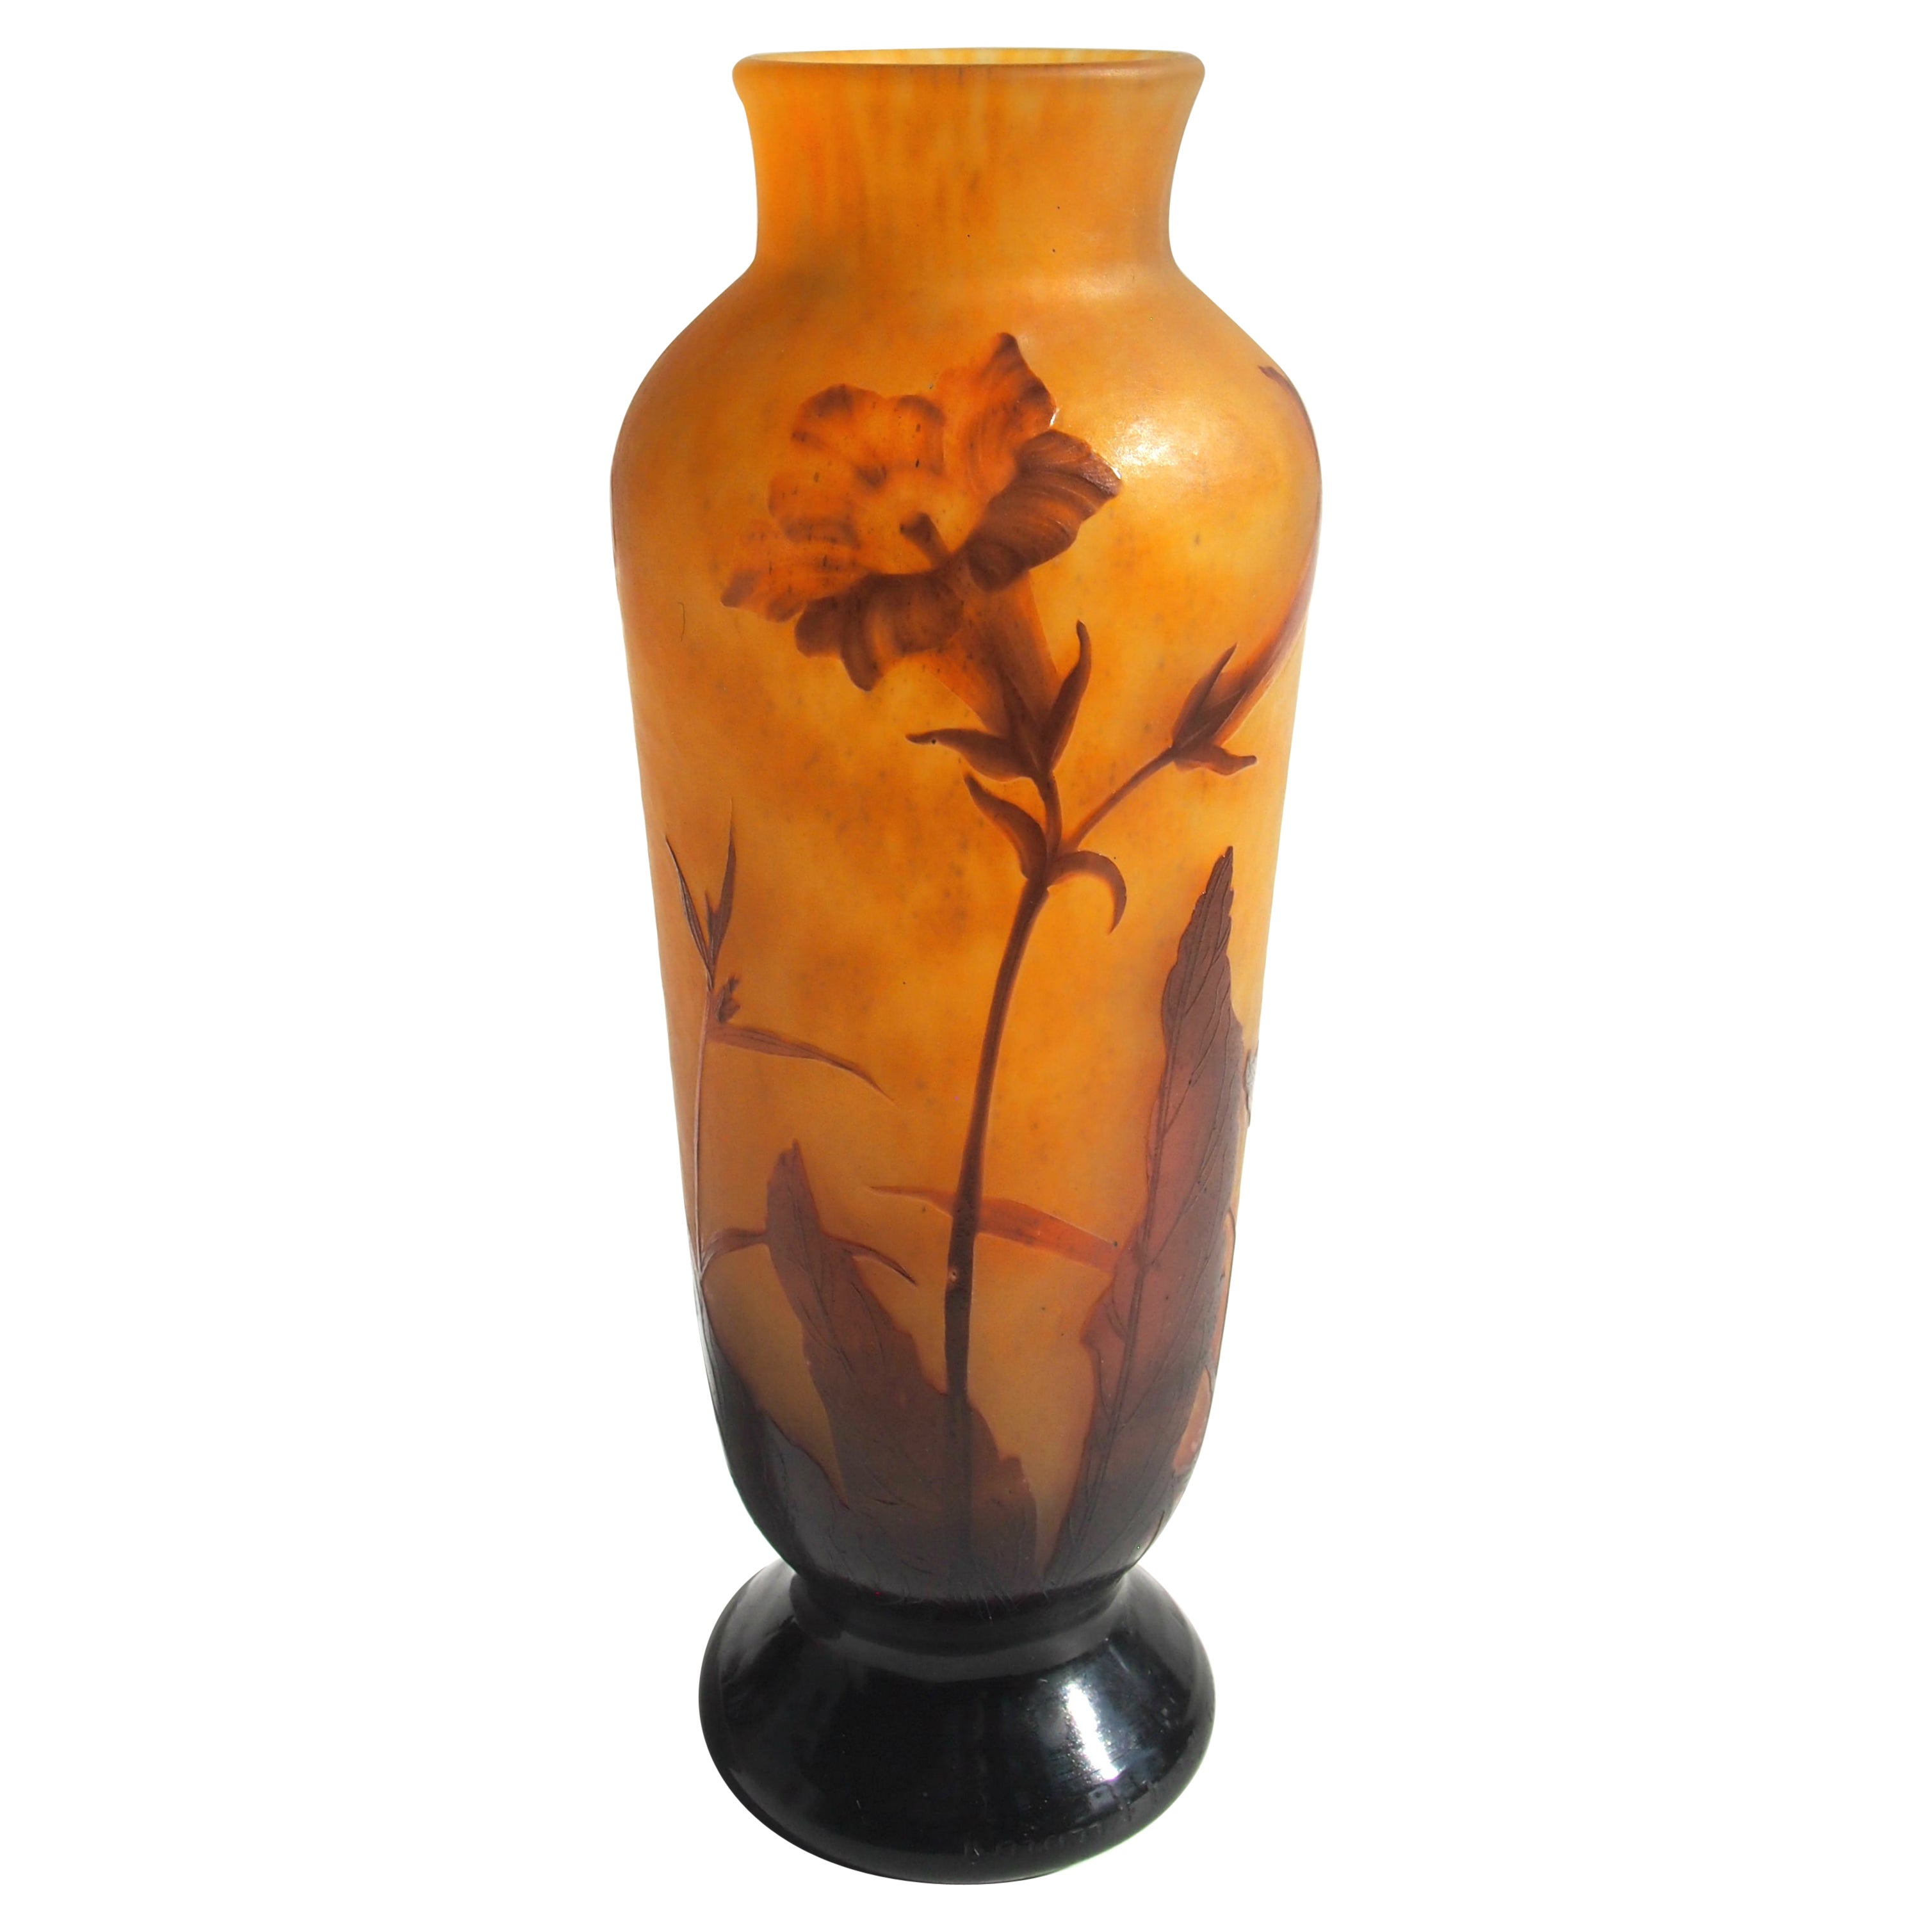 French Art Nouveau Daum Cameo and Wheel Carved Glass Nicotiana Vase c1900 For Sale